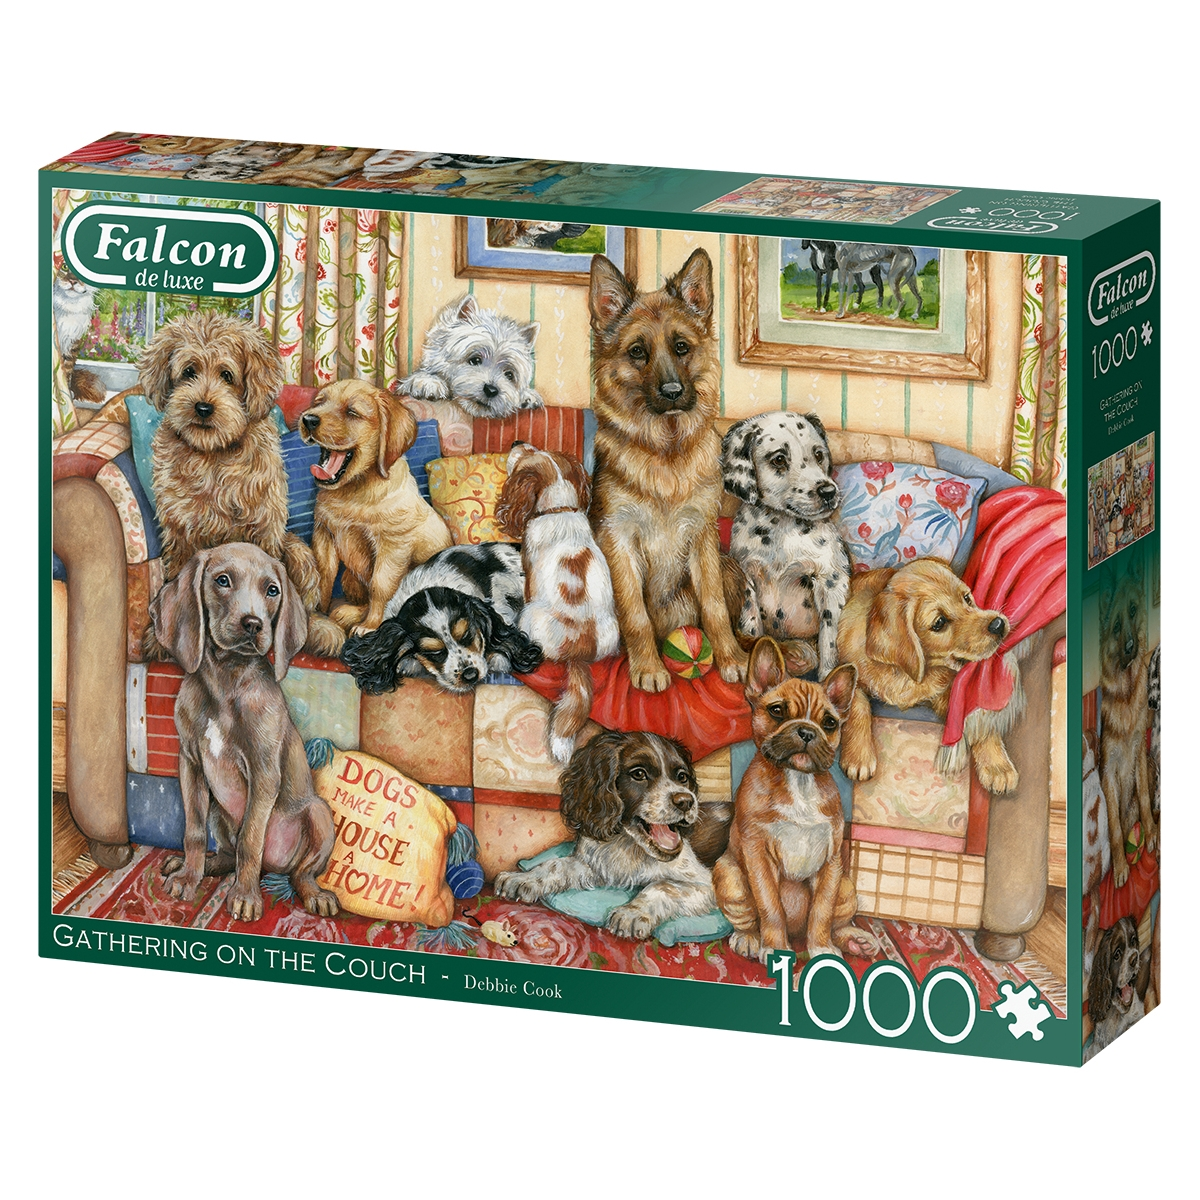 Couch-1000 Puzzle on Teile FALCON Jumbo Dog 11293 The Zubehör, Mehrfarben Gathering